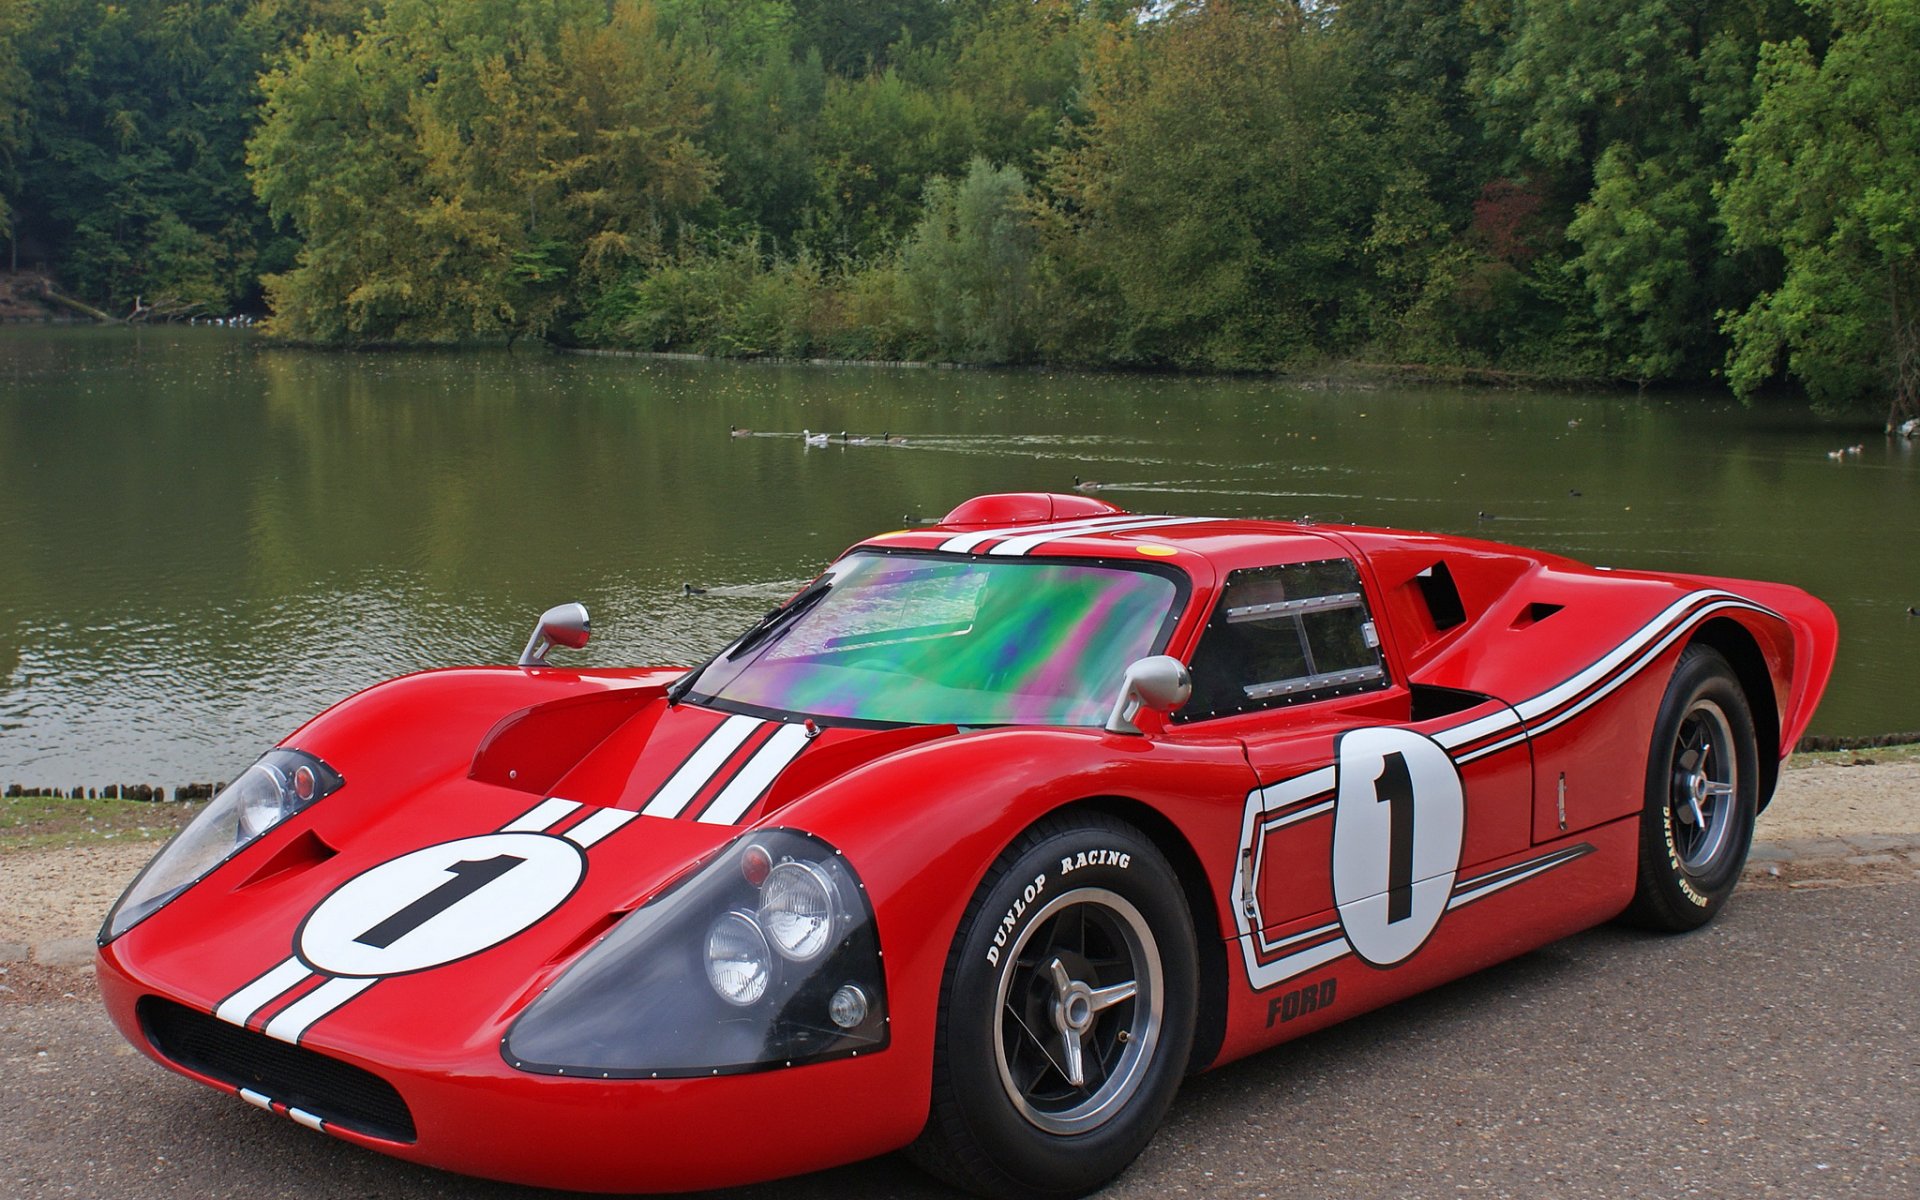 Ford GT40 - The Icon Of The Ford Motor Company - collectorscarworld